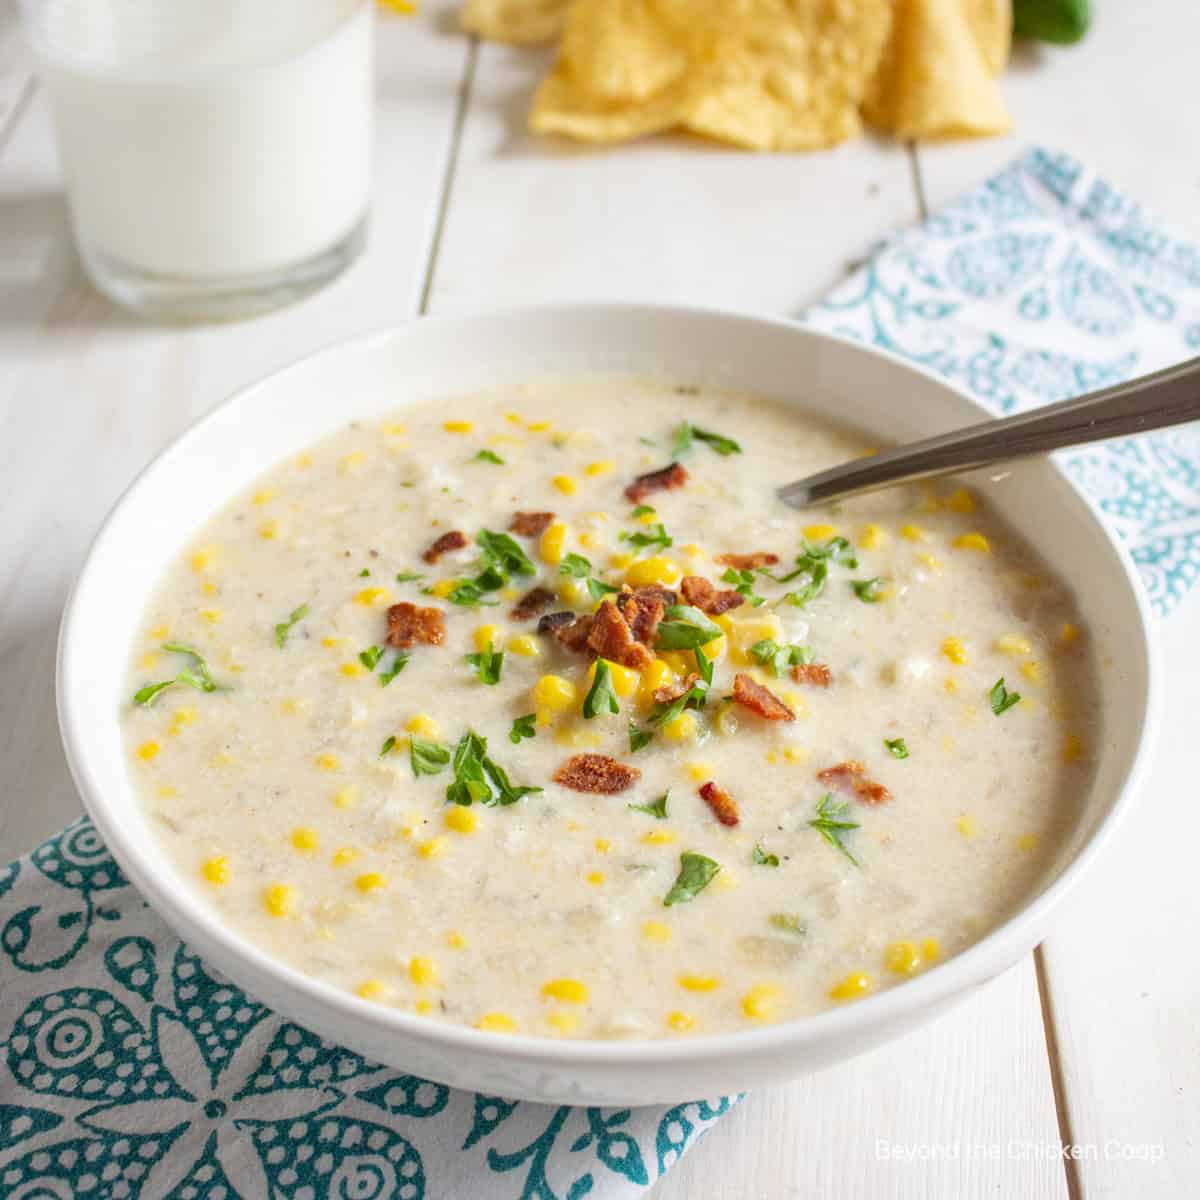 A bowl filled with corn chowder topped with bacon and herbs.